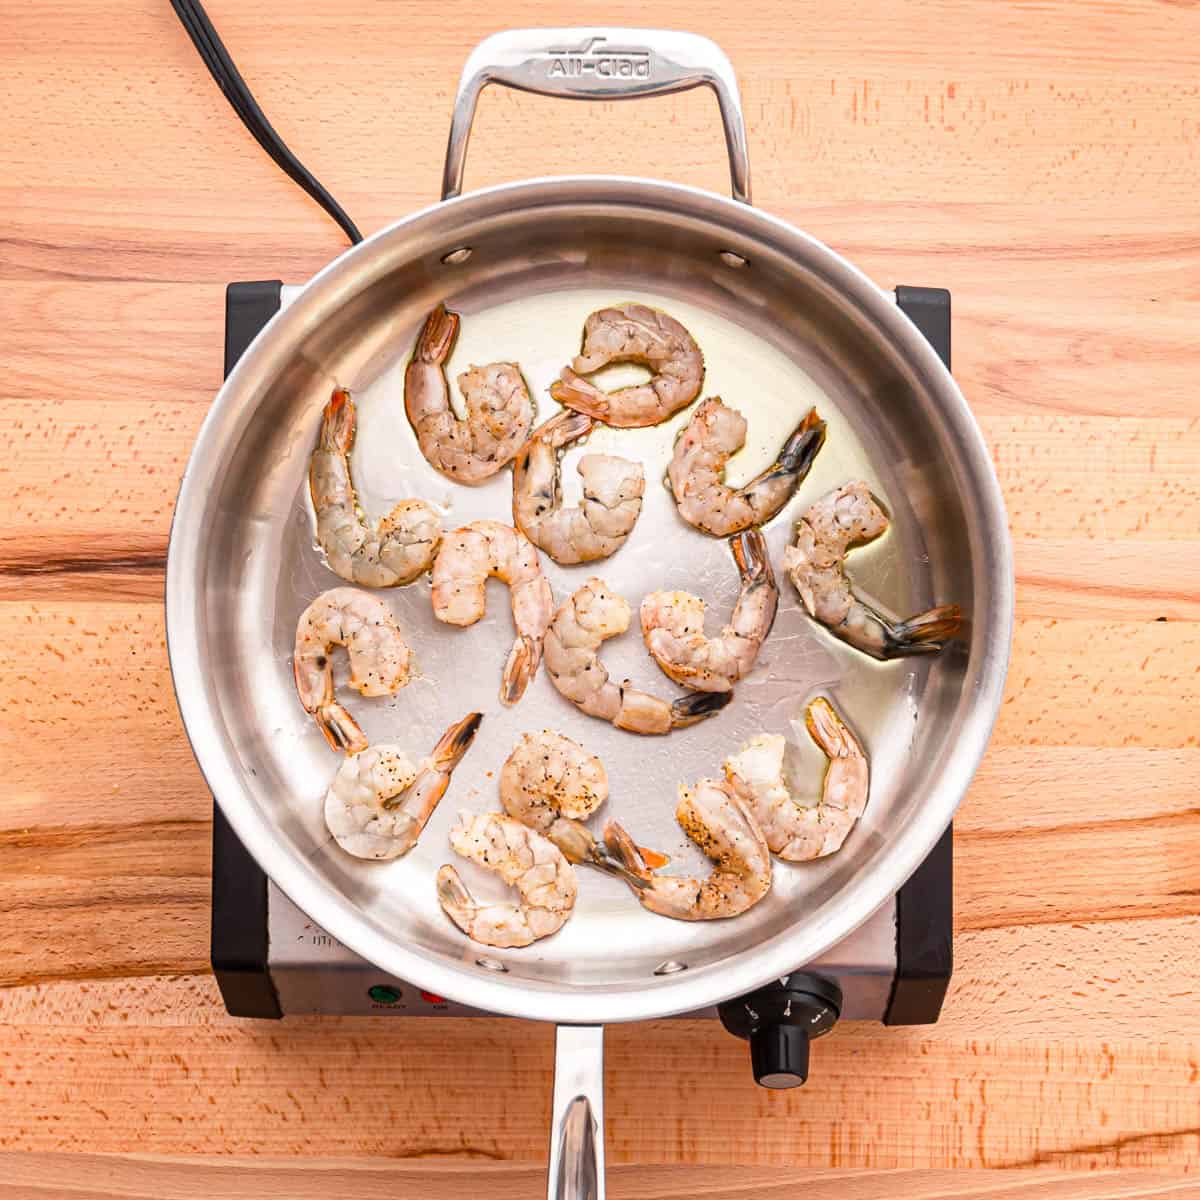 In a skillet heat oil over medium-high heat

Add the seasoned shrimp and cook them until they turn pink. This process usually takes about 2-3 minutes. Be careful not to overcook them, as shrimp can become tough if cooked for too long.